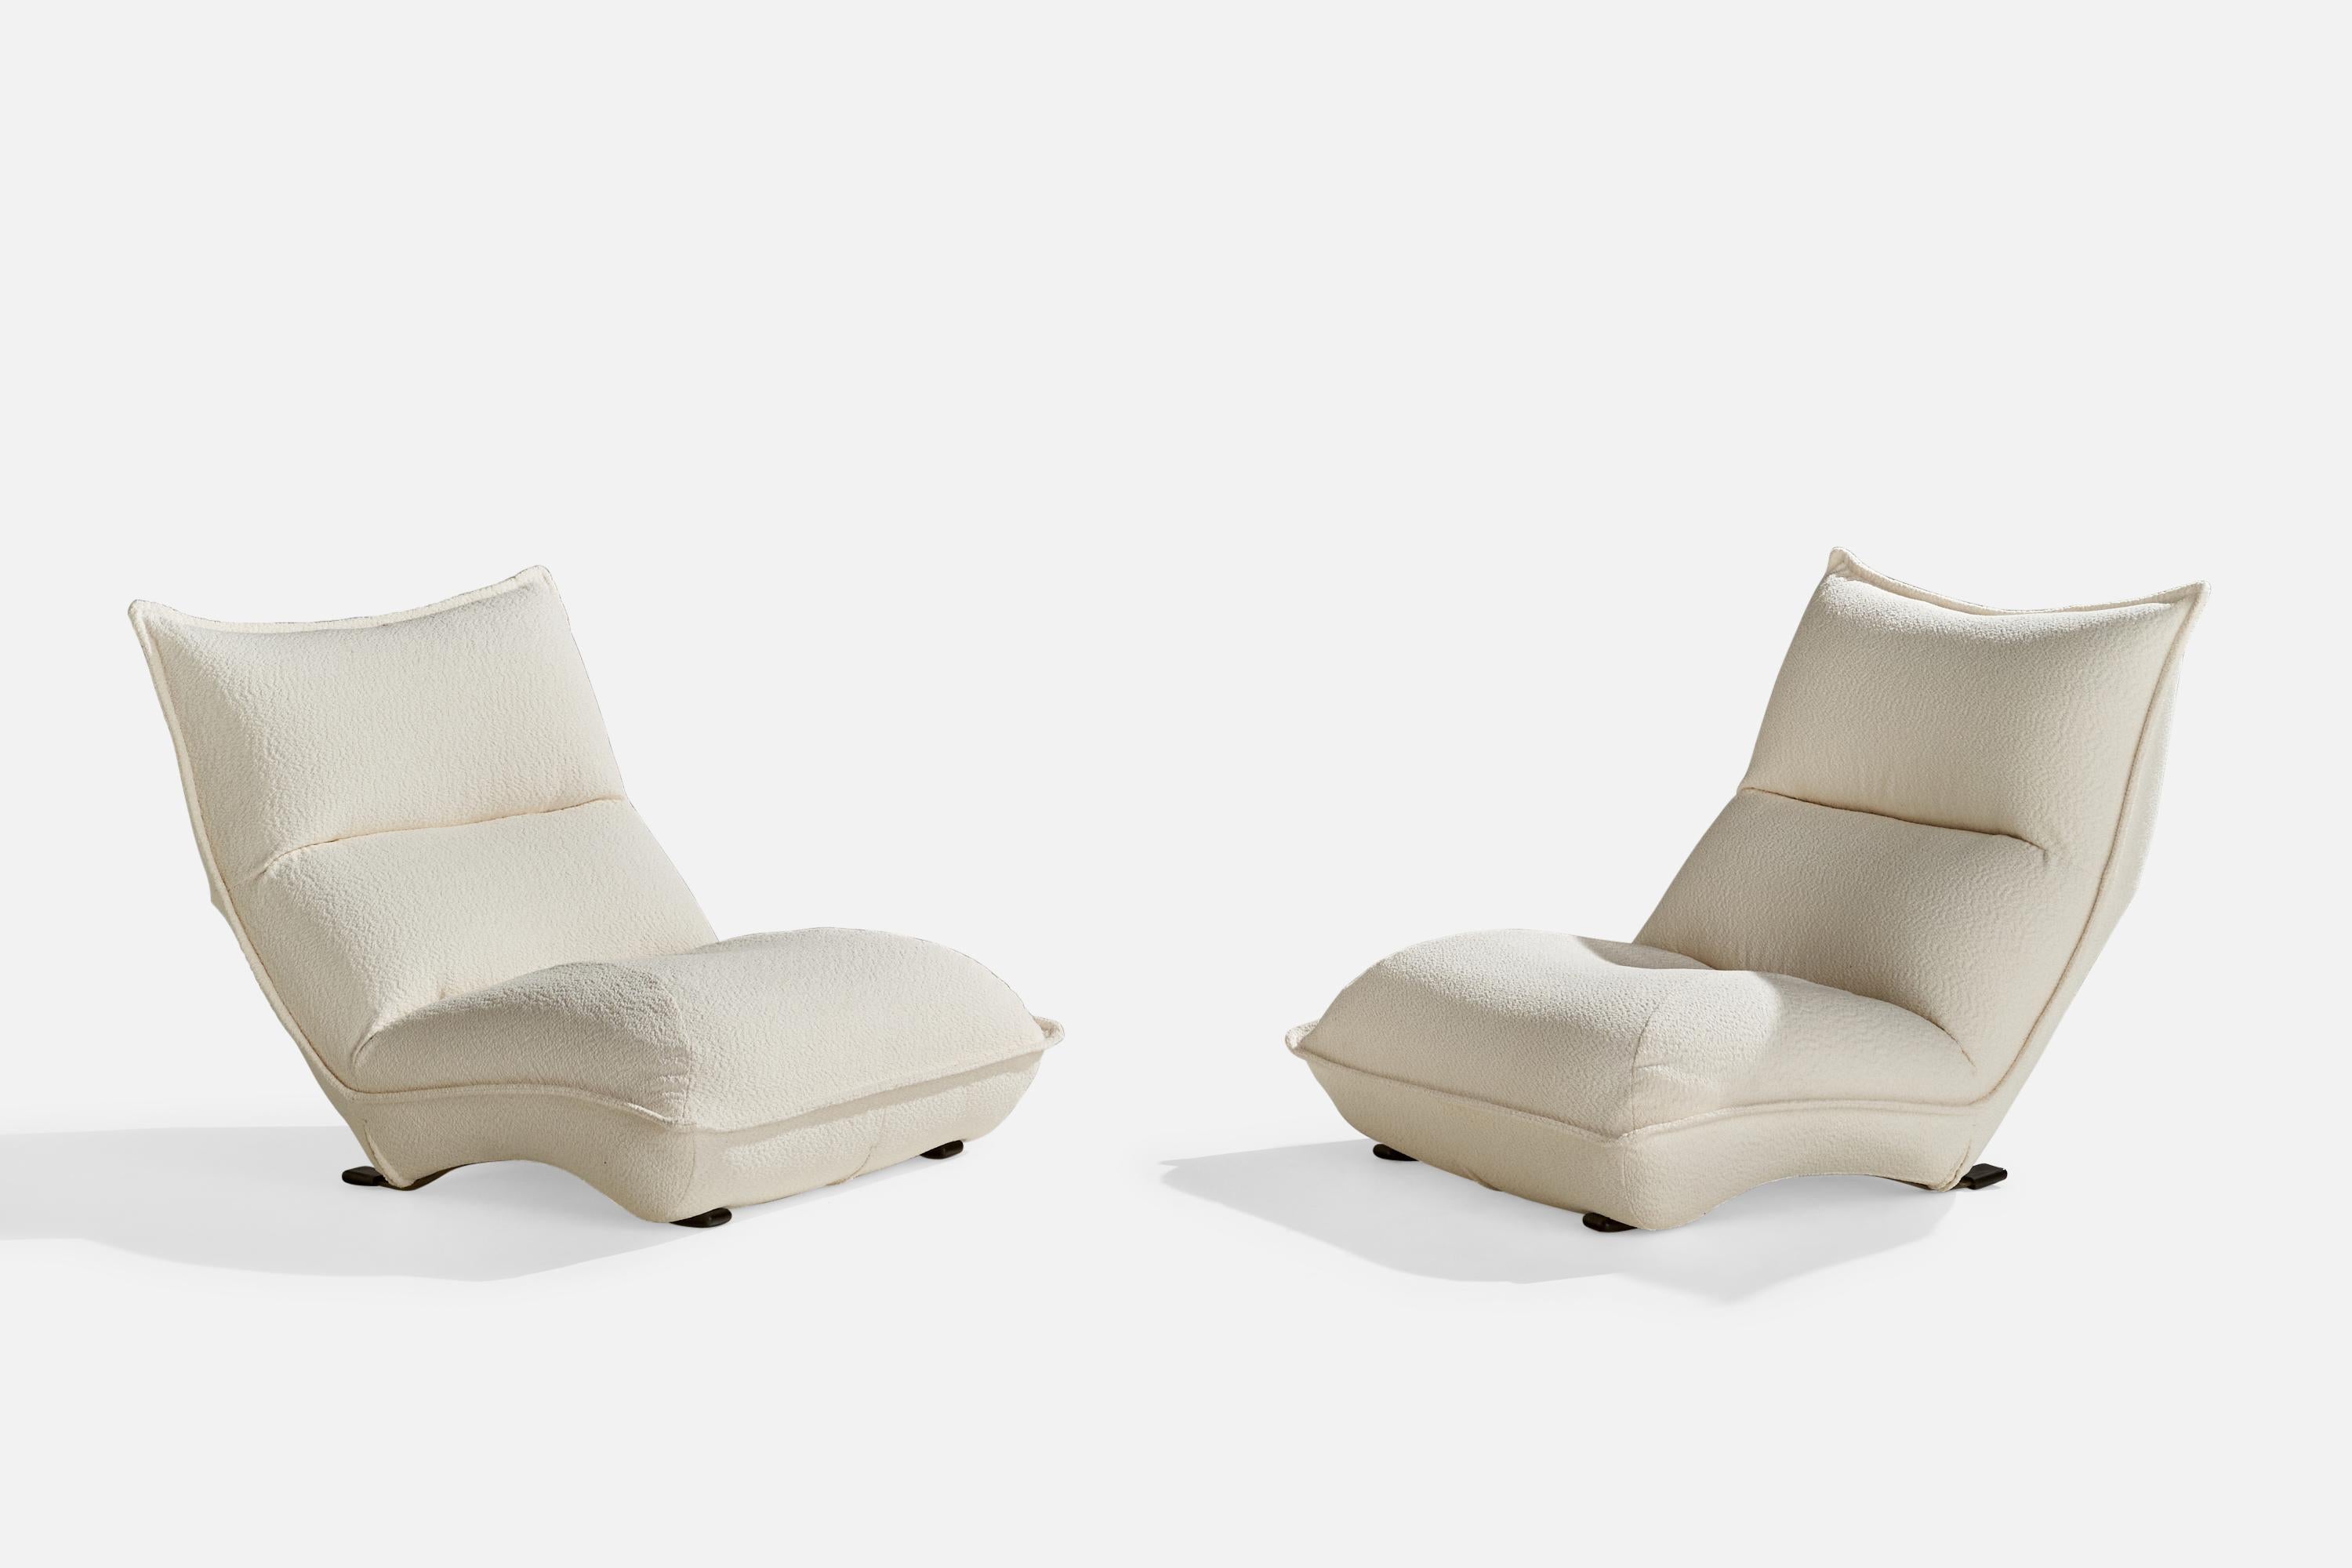 A pair of sizeable white fabric, metal and plastic lounge chairs designed by Vittorio Varo and produced by Plan Interior Design, Italy, 1970s.

Seat height 12”.